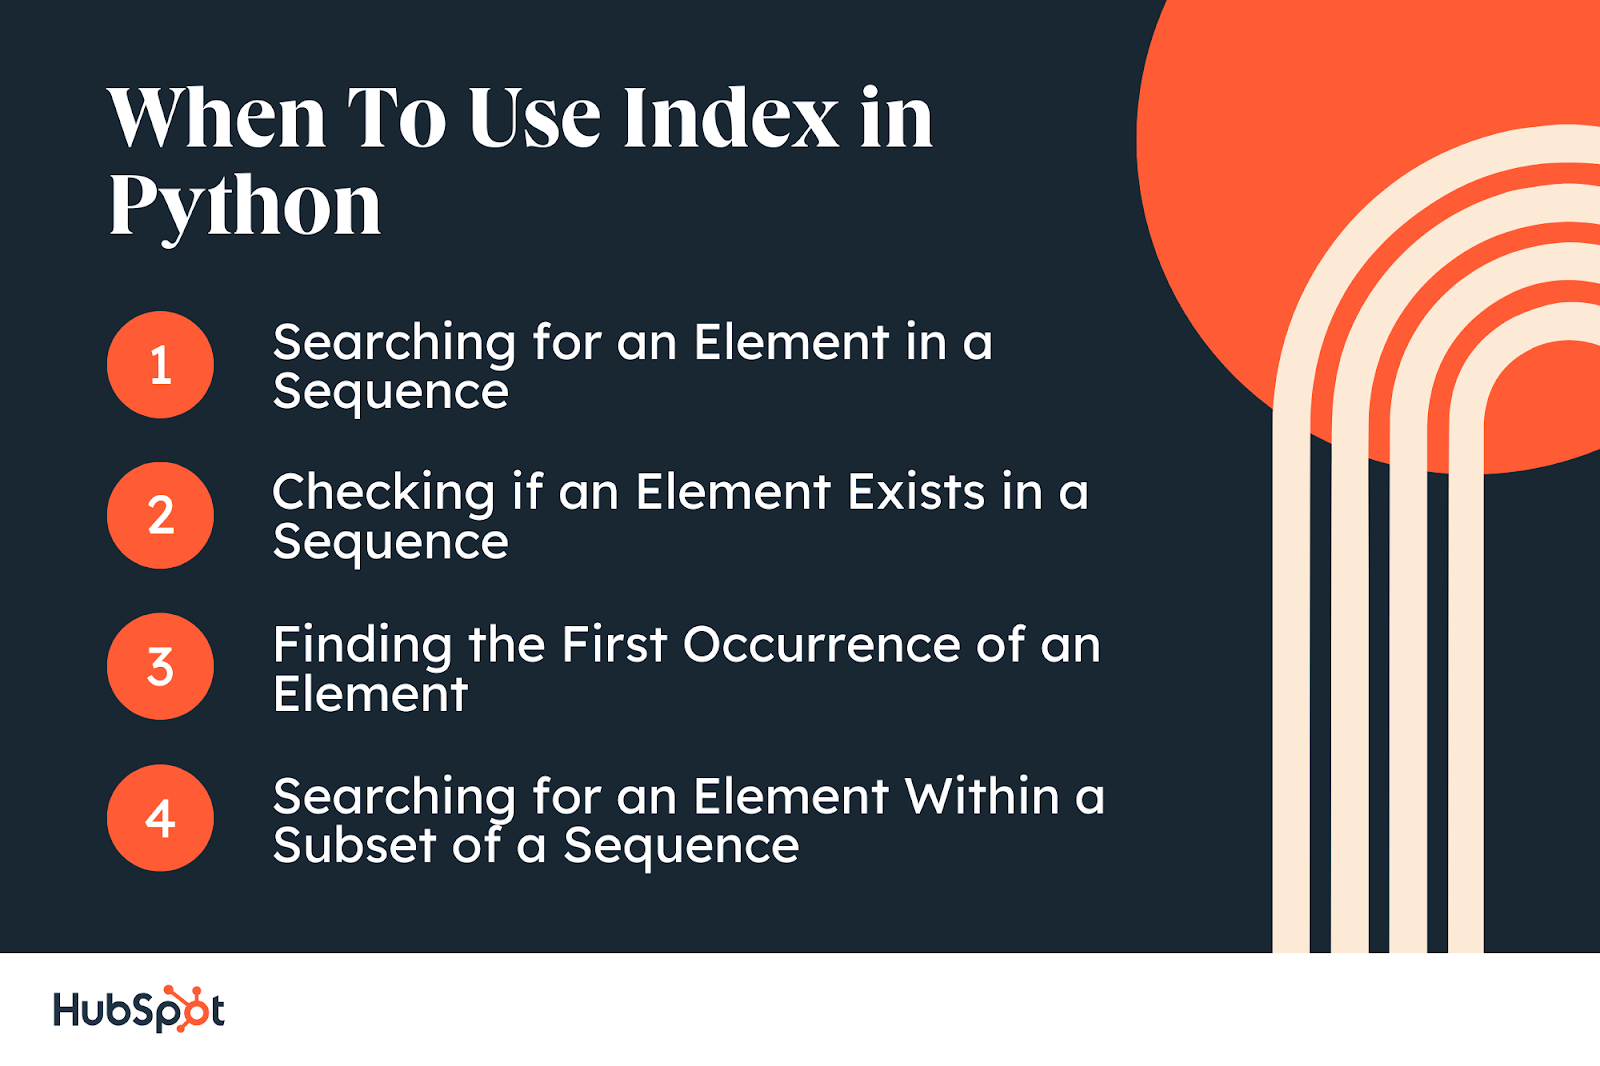 When To Use Index in Python. Searching for an Element in a Sequence. Checking if an Element Exists in a Sequence. Finding the First Occurrence of an Element. Searching for an Element Within a Subset of a Sequence.